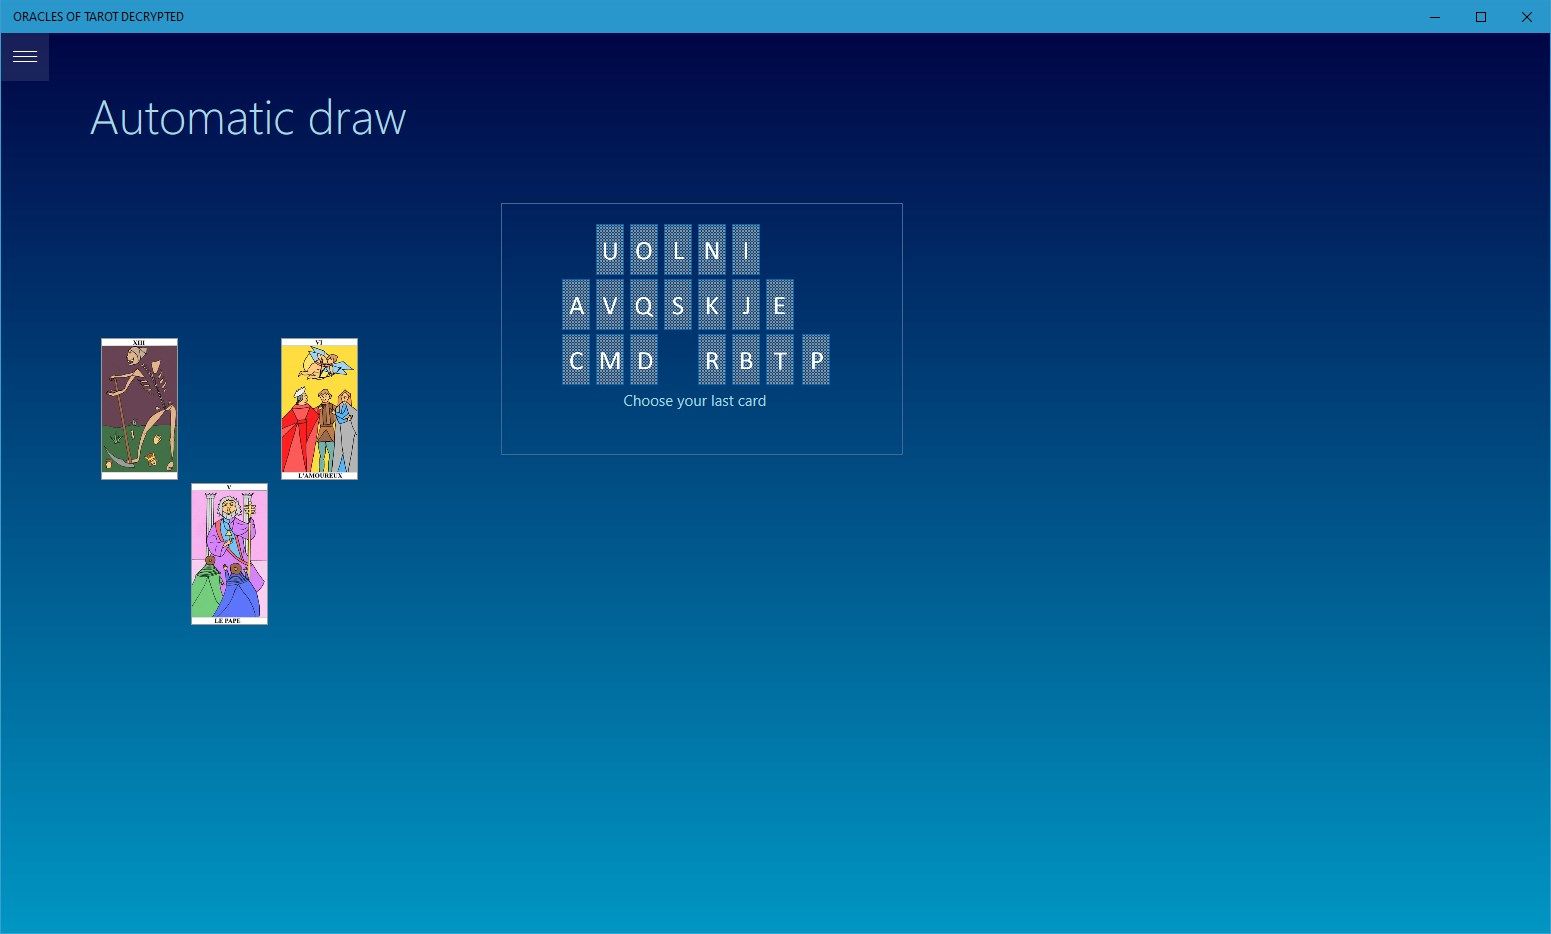 The autoatic draw...